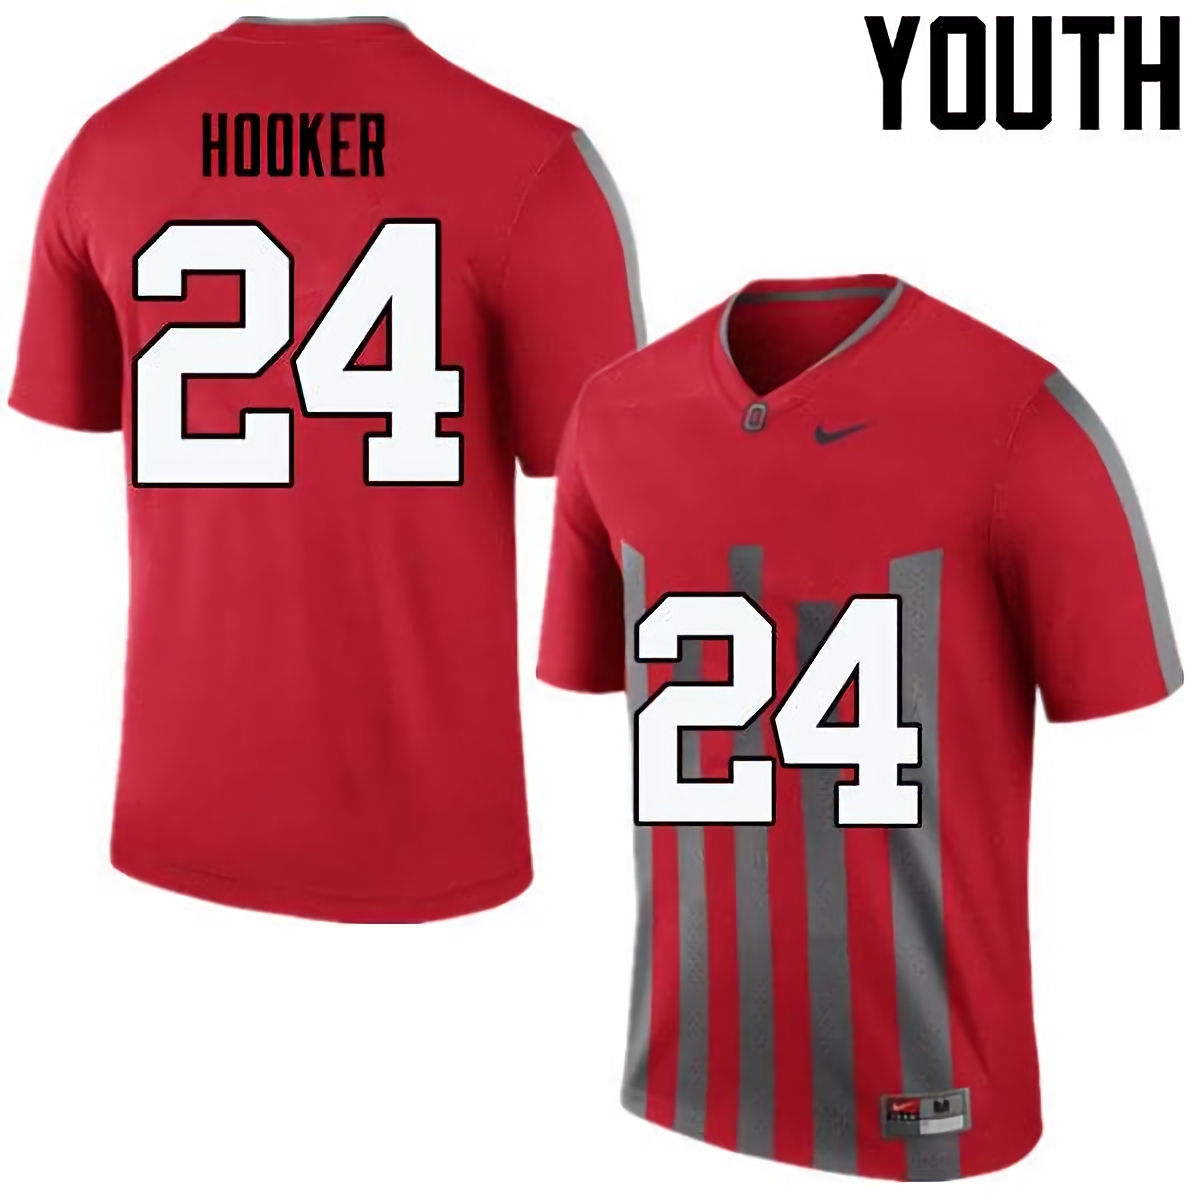 Malik Hooker Ohio State Buckeyes Youth NCAA #24 Nike Throwback Red College Stitched Football Jersey SLN4856OI